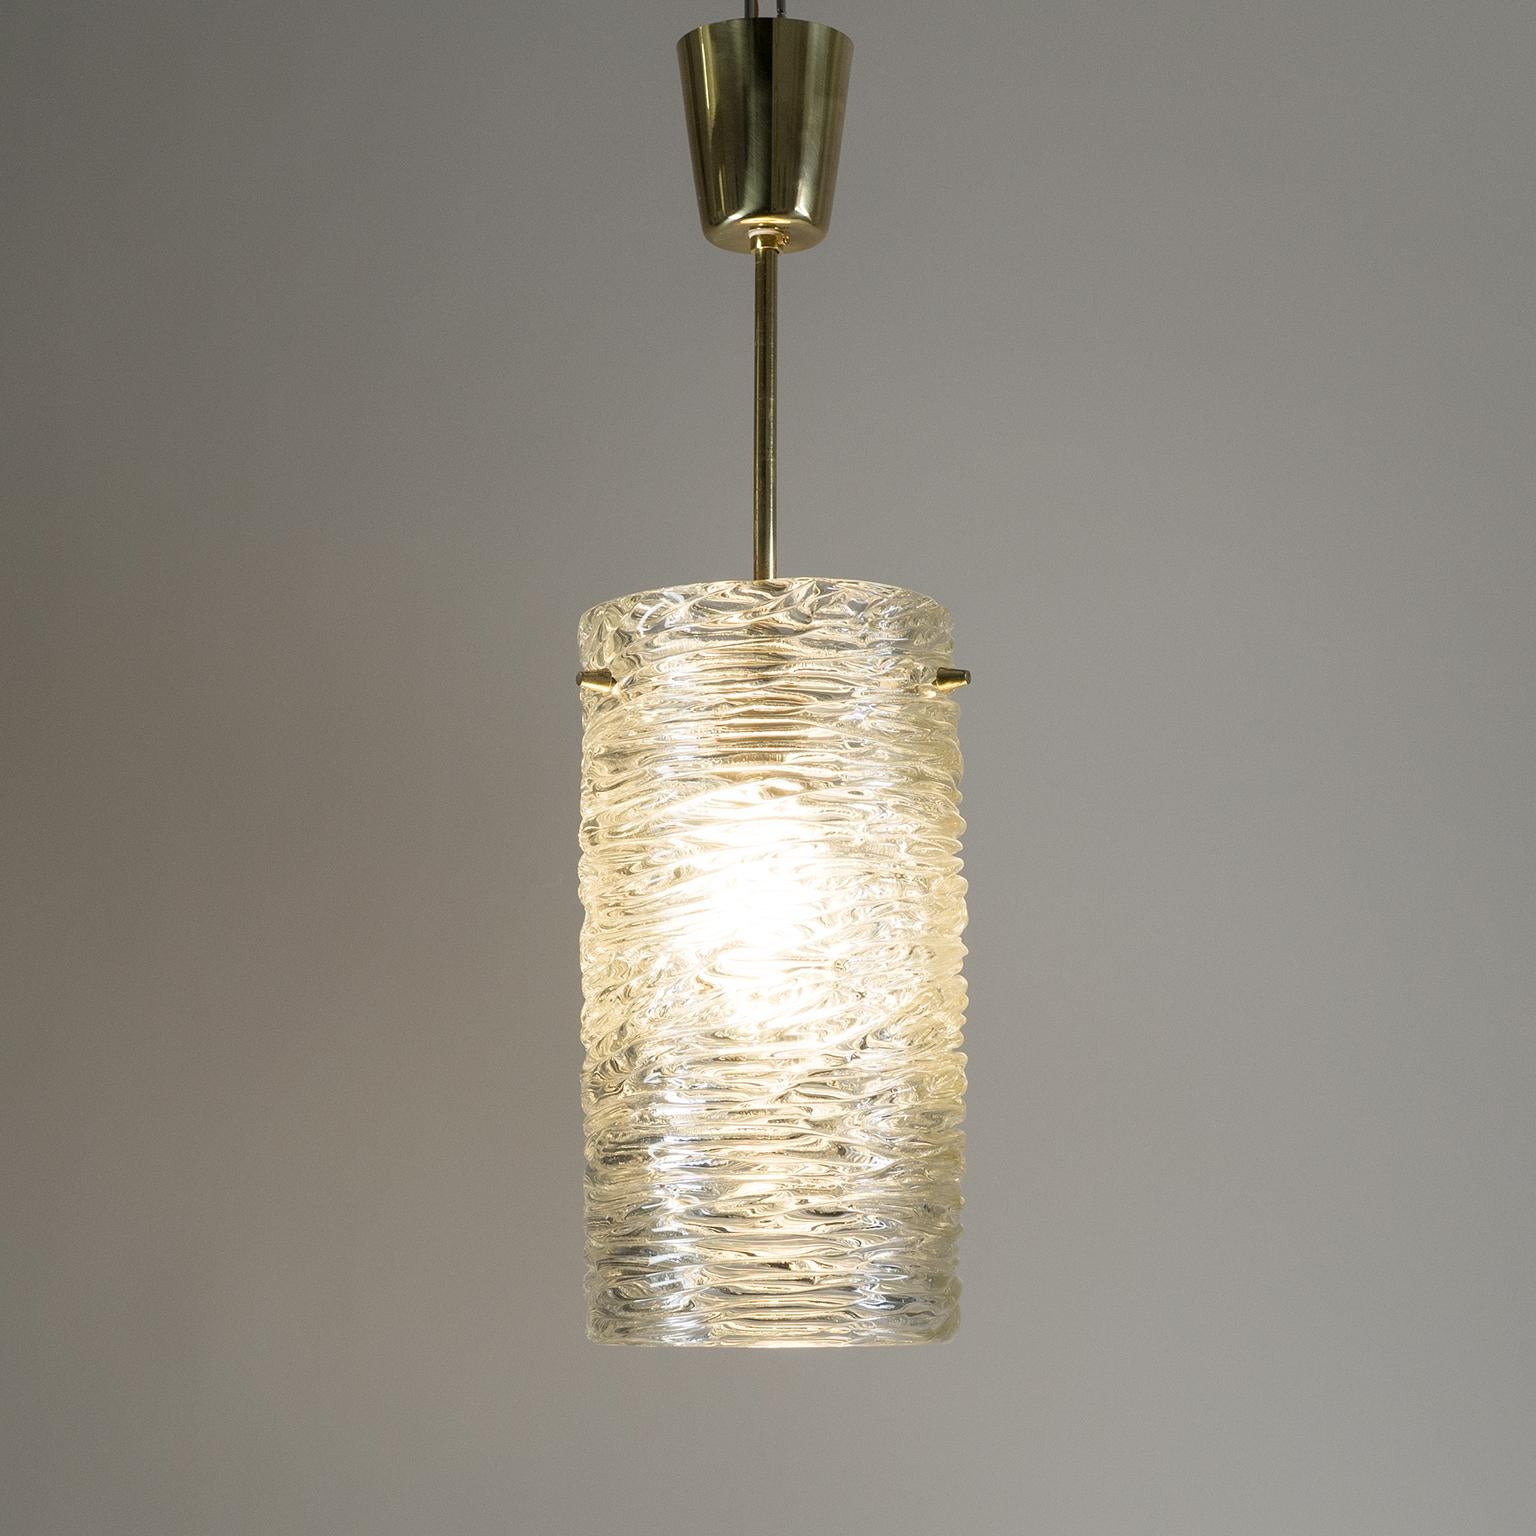 Classic 1950s J.T. Kalmar pendant with 'water-ripple' textured glass. Very good original condition with some light patina on the brass elements. One original brass E27 socket with new wiring. Height of the glass body is 11.5inches/30cm.